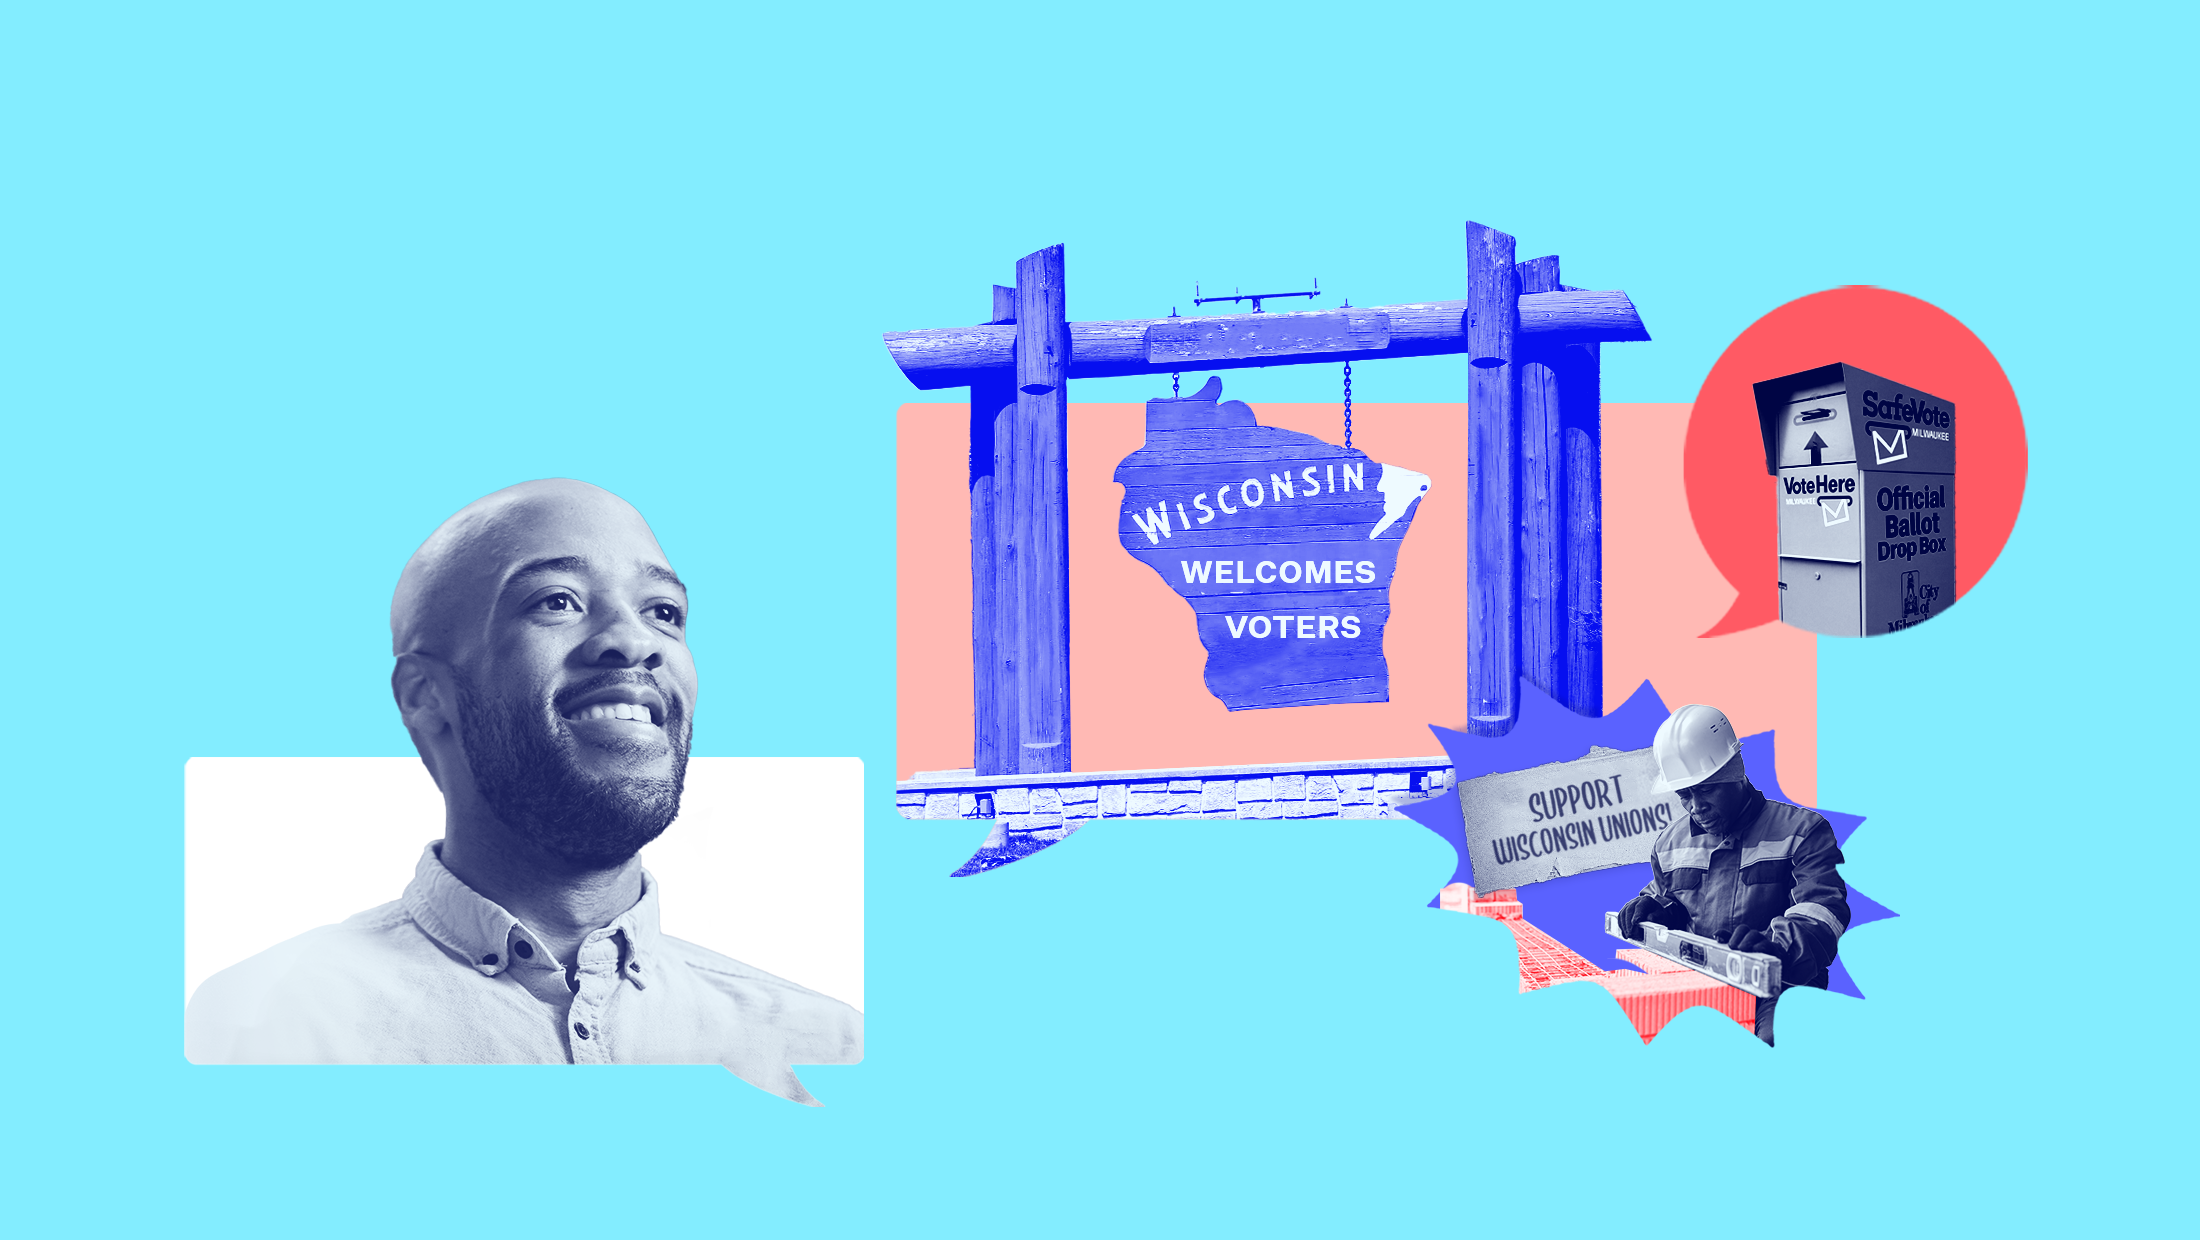 Light blue background with blue-toned image of U.S. Senate candidate Mandela Barnes, a blue wooden sign that reads "WISCONSIN WELCOMES VOTERS," a dark blue ballot drop box and a construction worker and a sign that reads "SUPPORT WISCONSIN UNIONS"